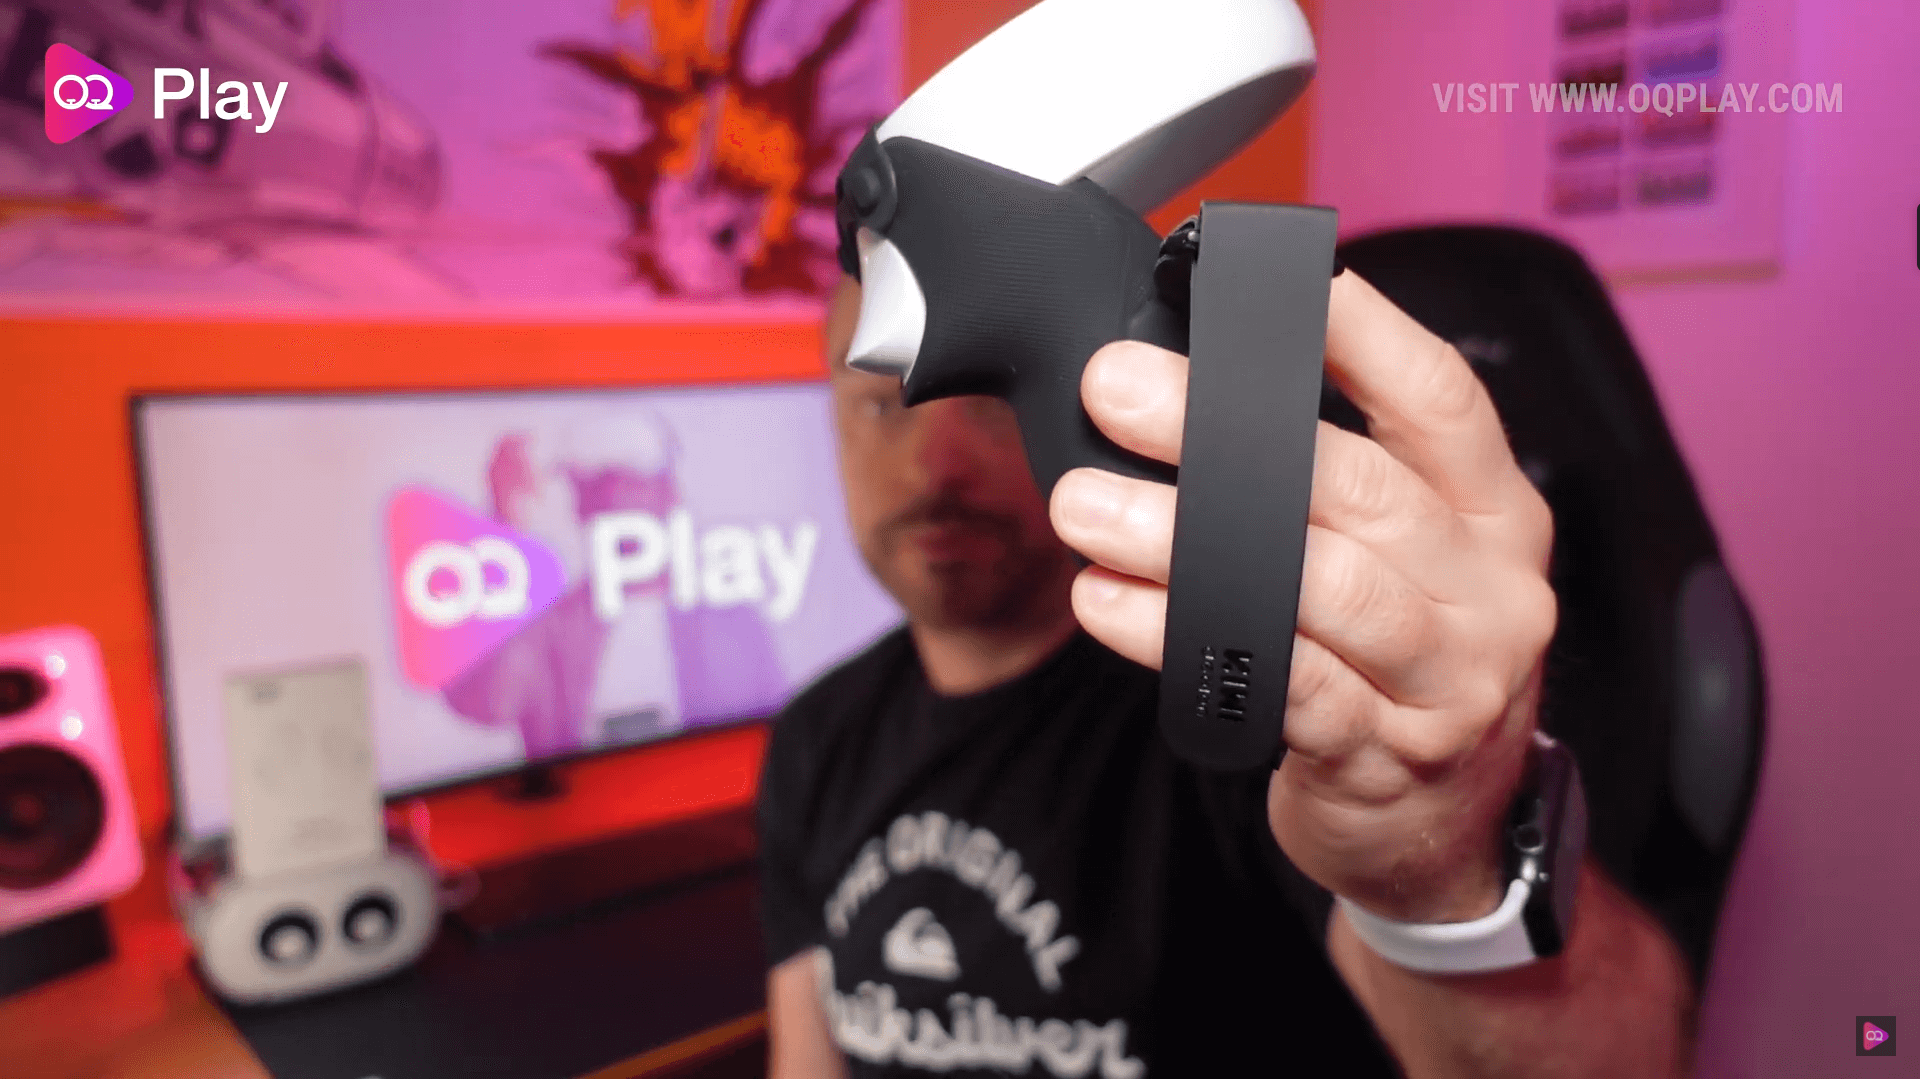 Kiwi Design Q1Pro-2 Grip Cover and Strap for Oculus Quest 2 – Install and First Impressions